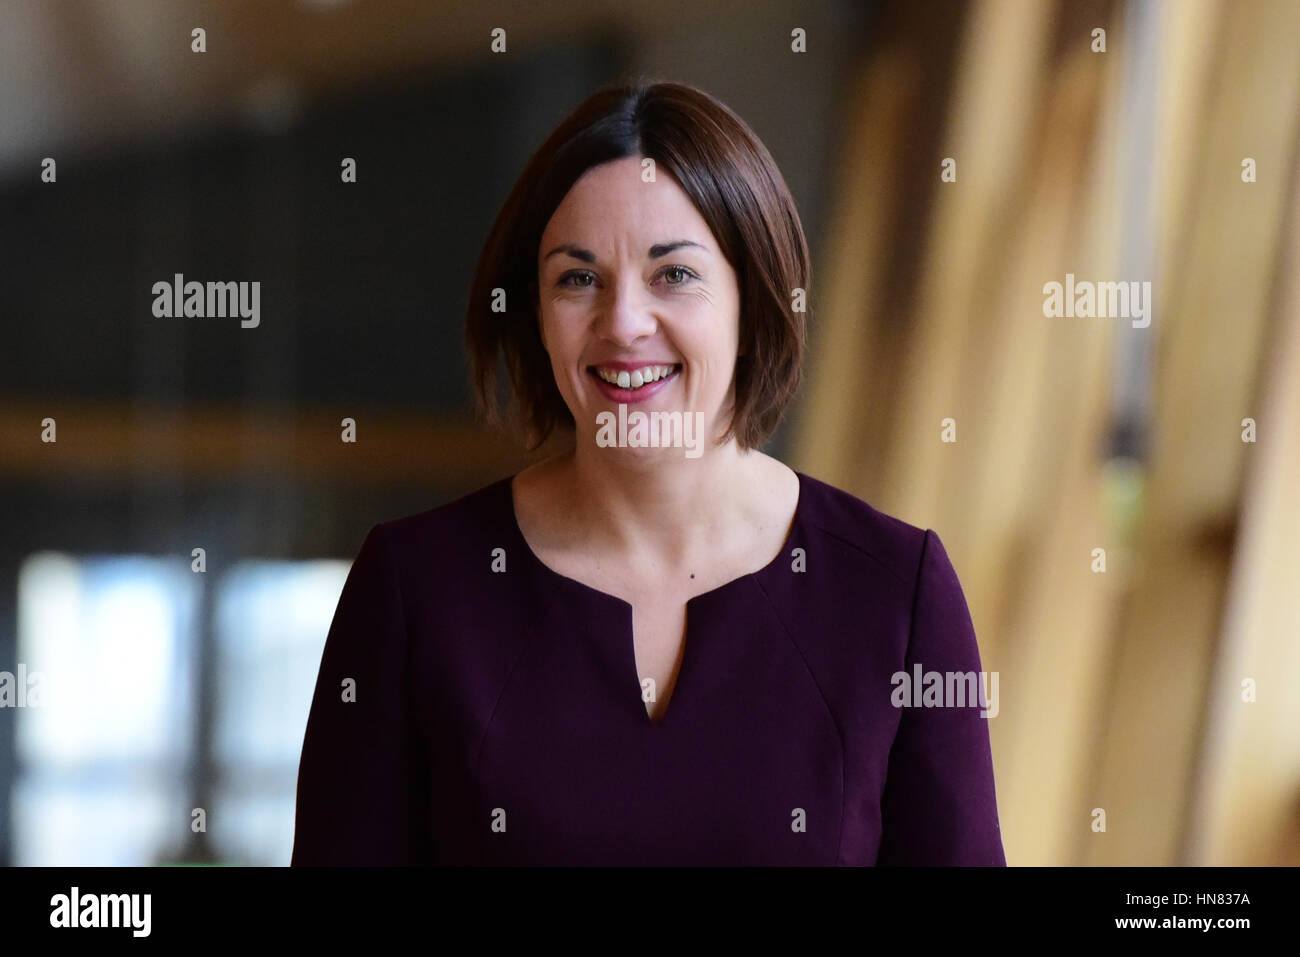 Edinburgh, Scotland, United Kingdom. 9th February, 2017. Scottish Labour leader Kezia Dugdale on the way to First Minister's Questions in the Scottish Parliament, Credit: Ken Jack/Alamy Live News Stock Photo